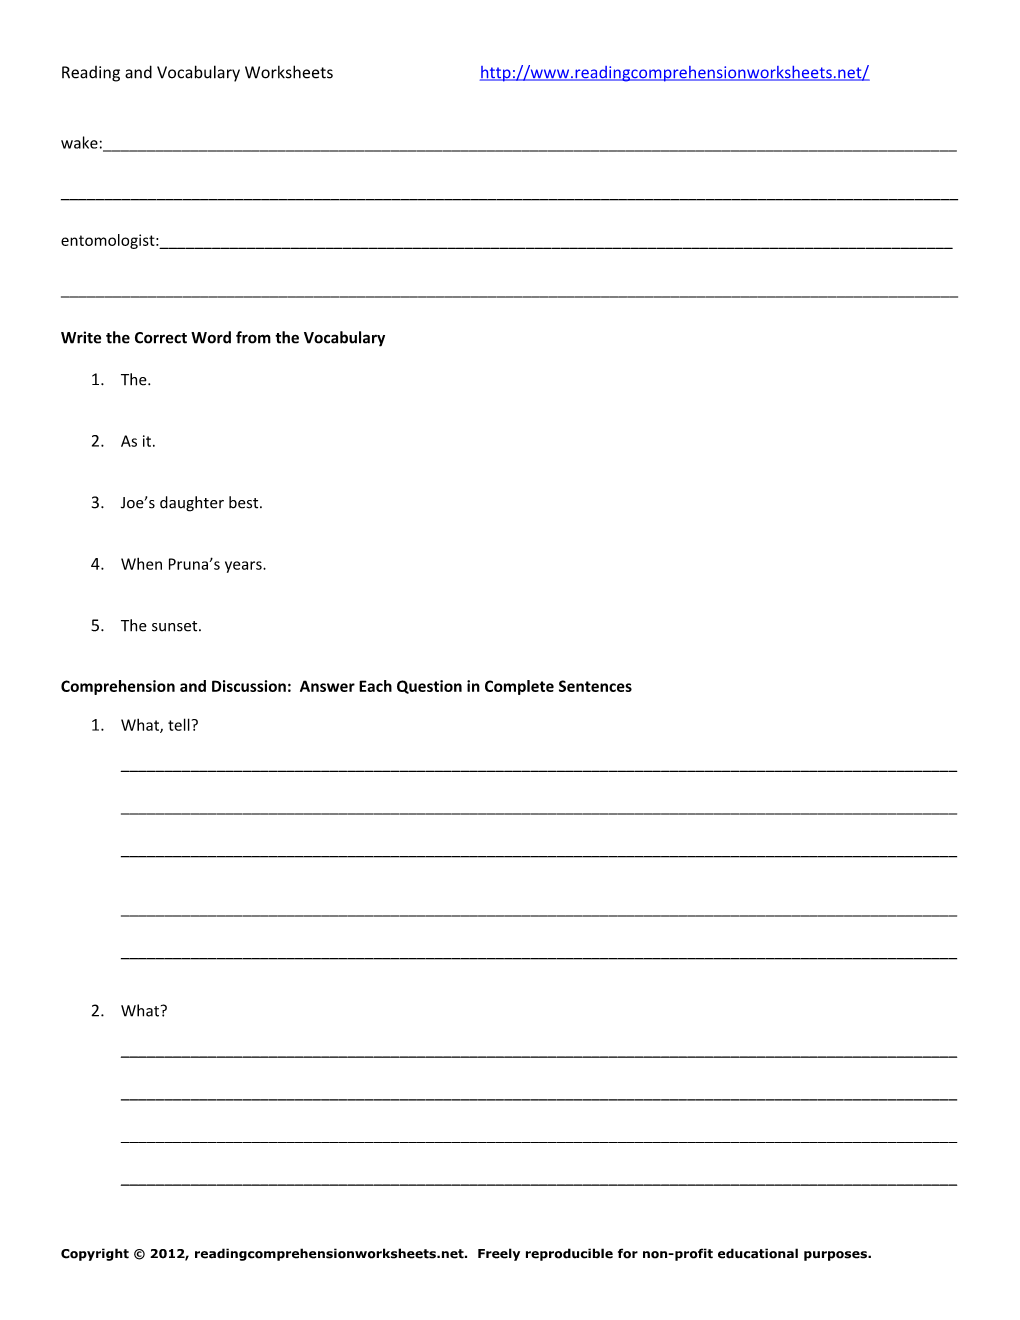 Reading and Vocabulary Worksheets